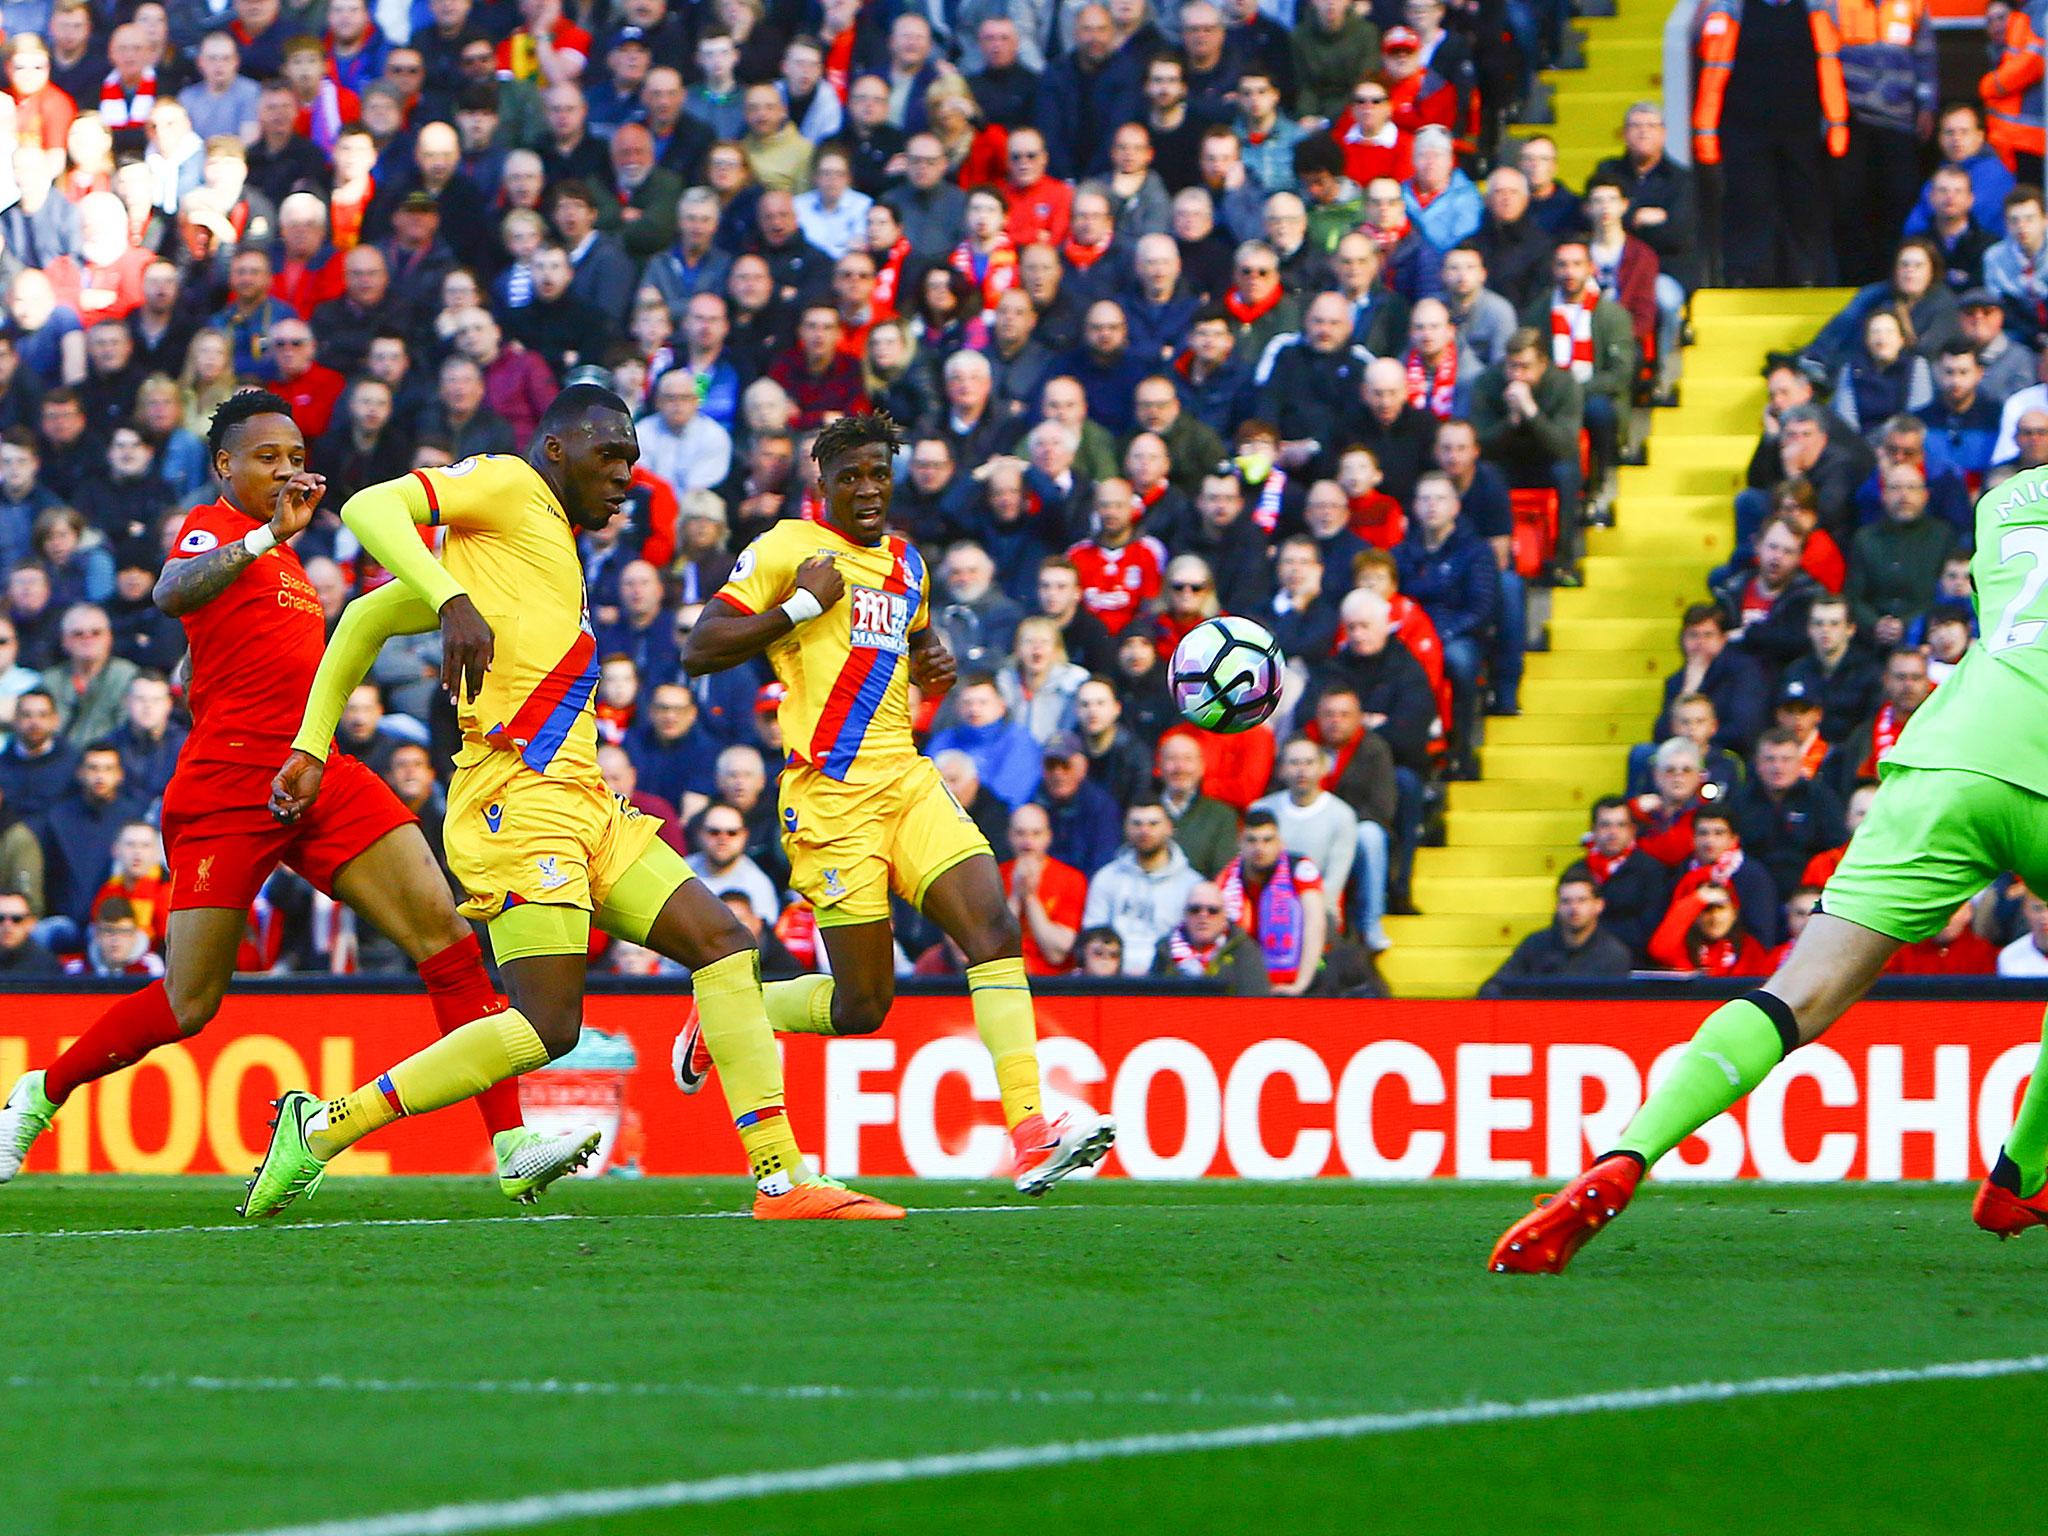 Christian Benteke scores his first goal against Liverpool for Crystal Palace